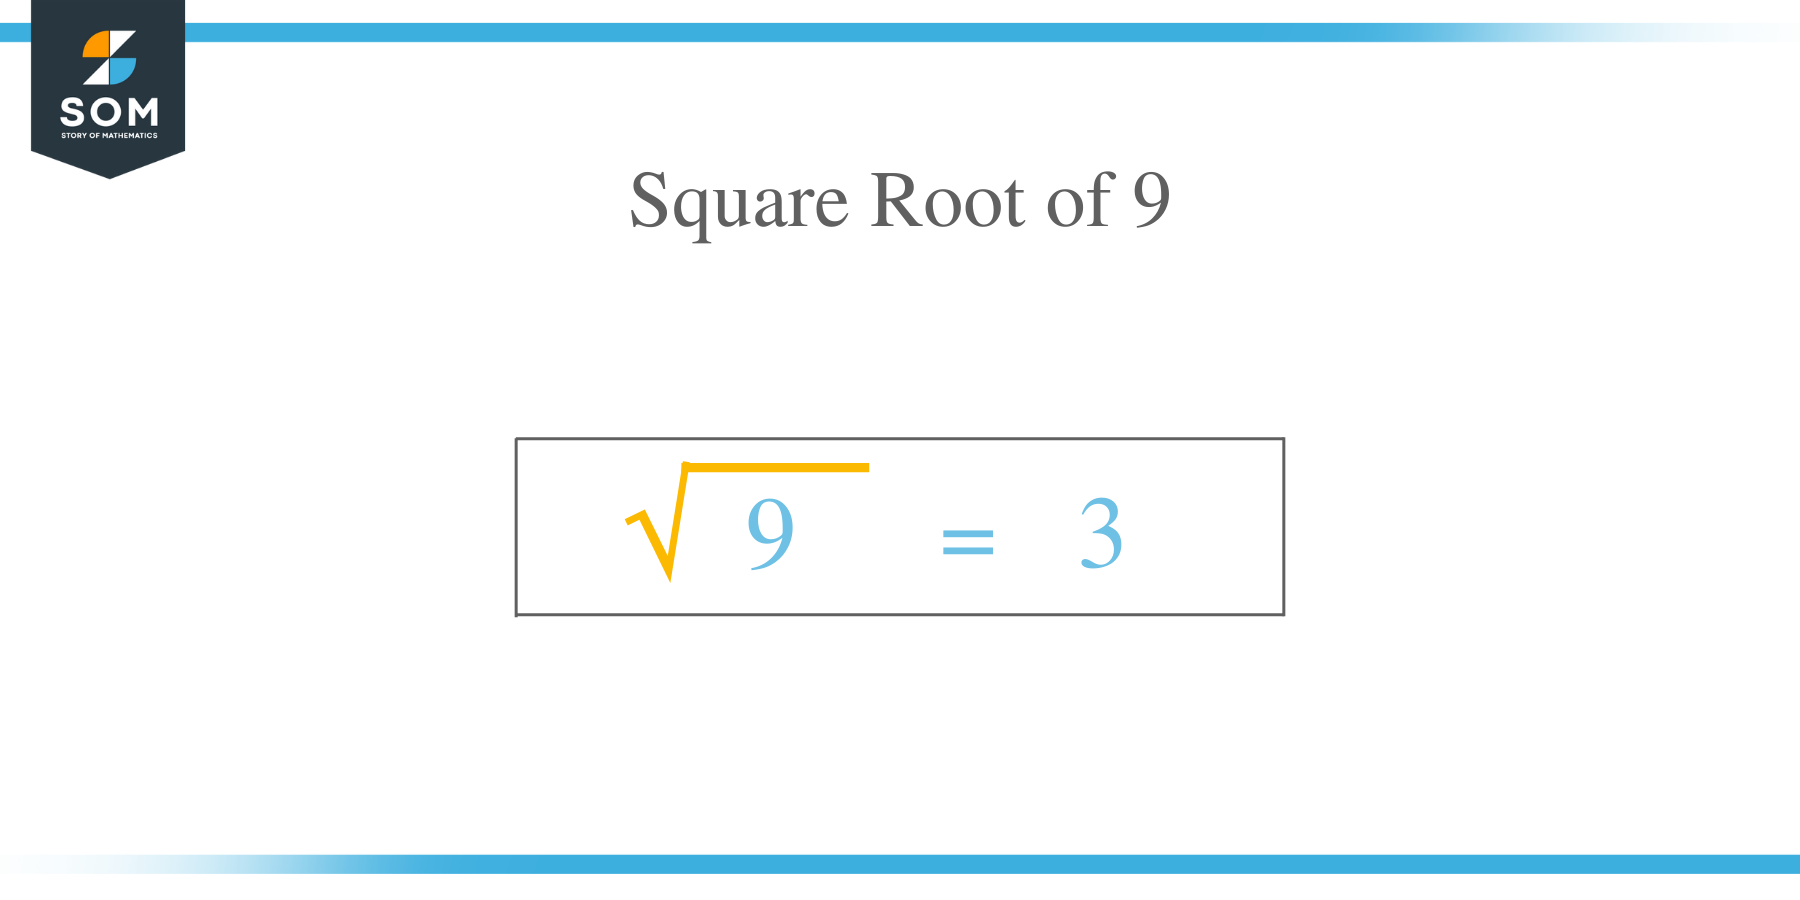 Square Root of 9